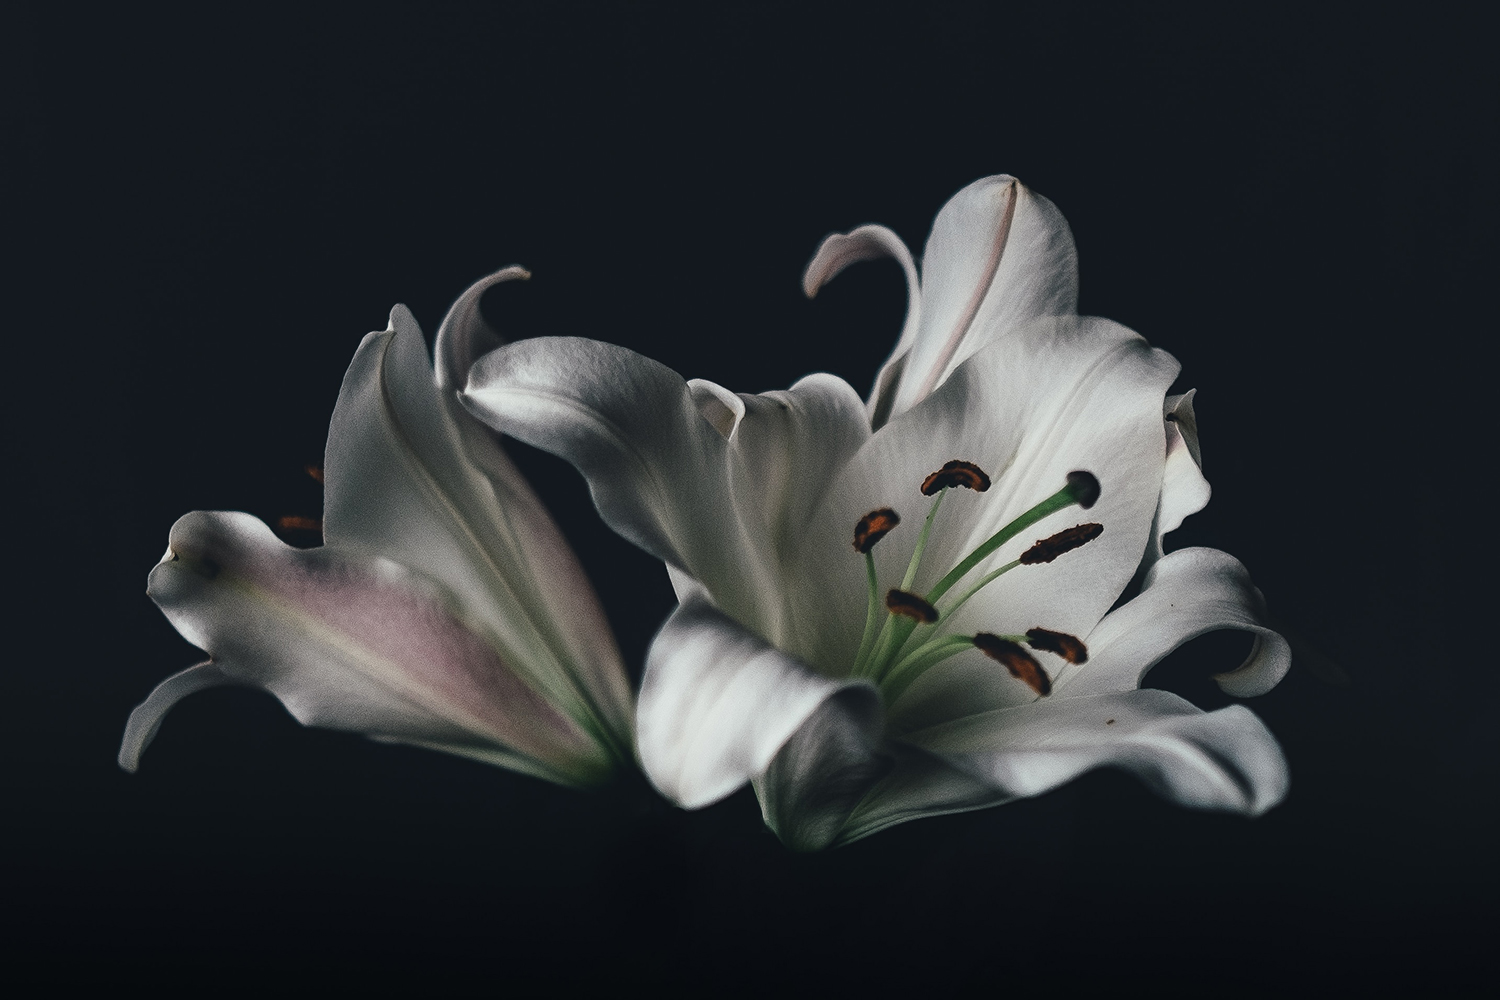 How to Capture Phenomenal Flower Photographs